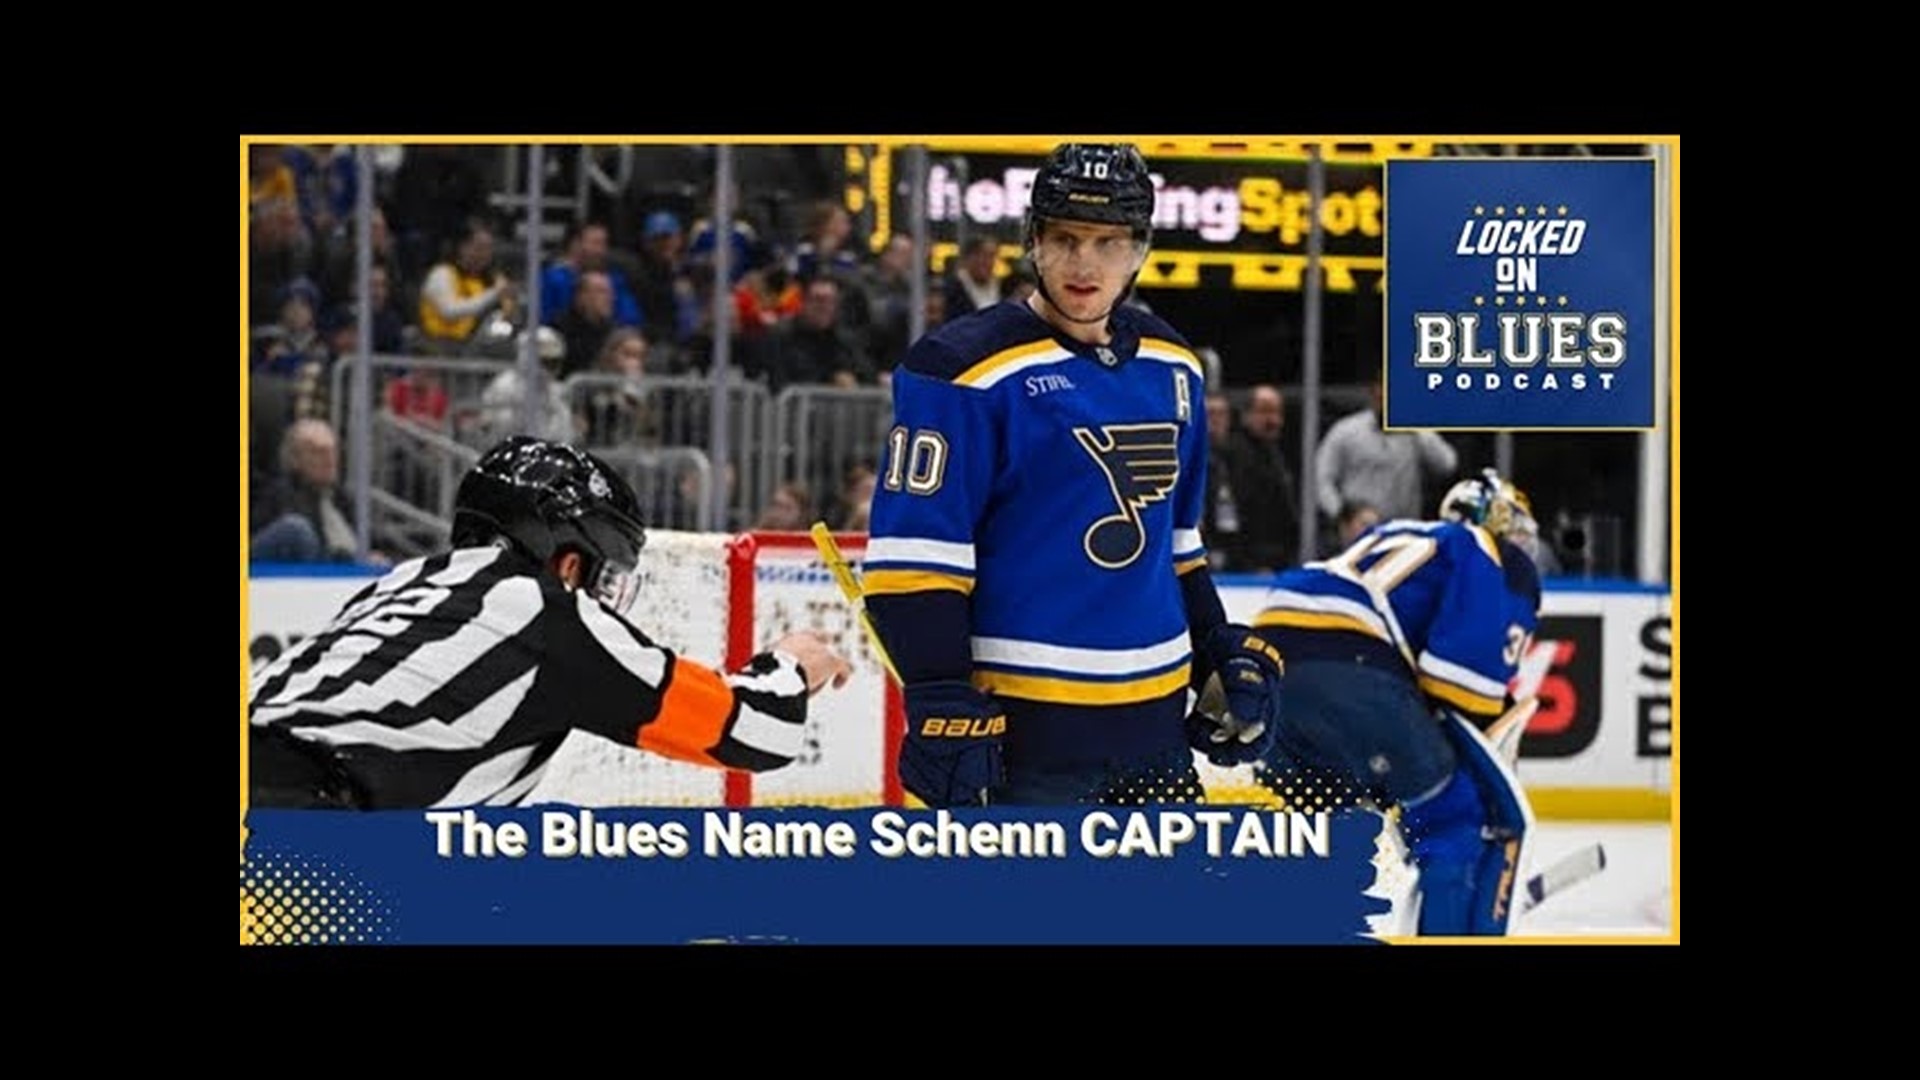 Brayden Schenn Is The St. Louis Blues' Captain - 24th In Franchise History